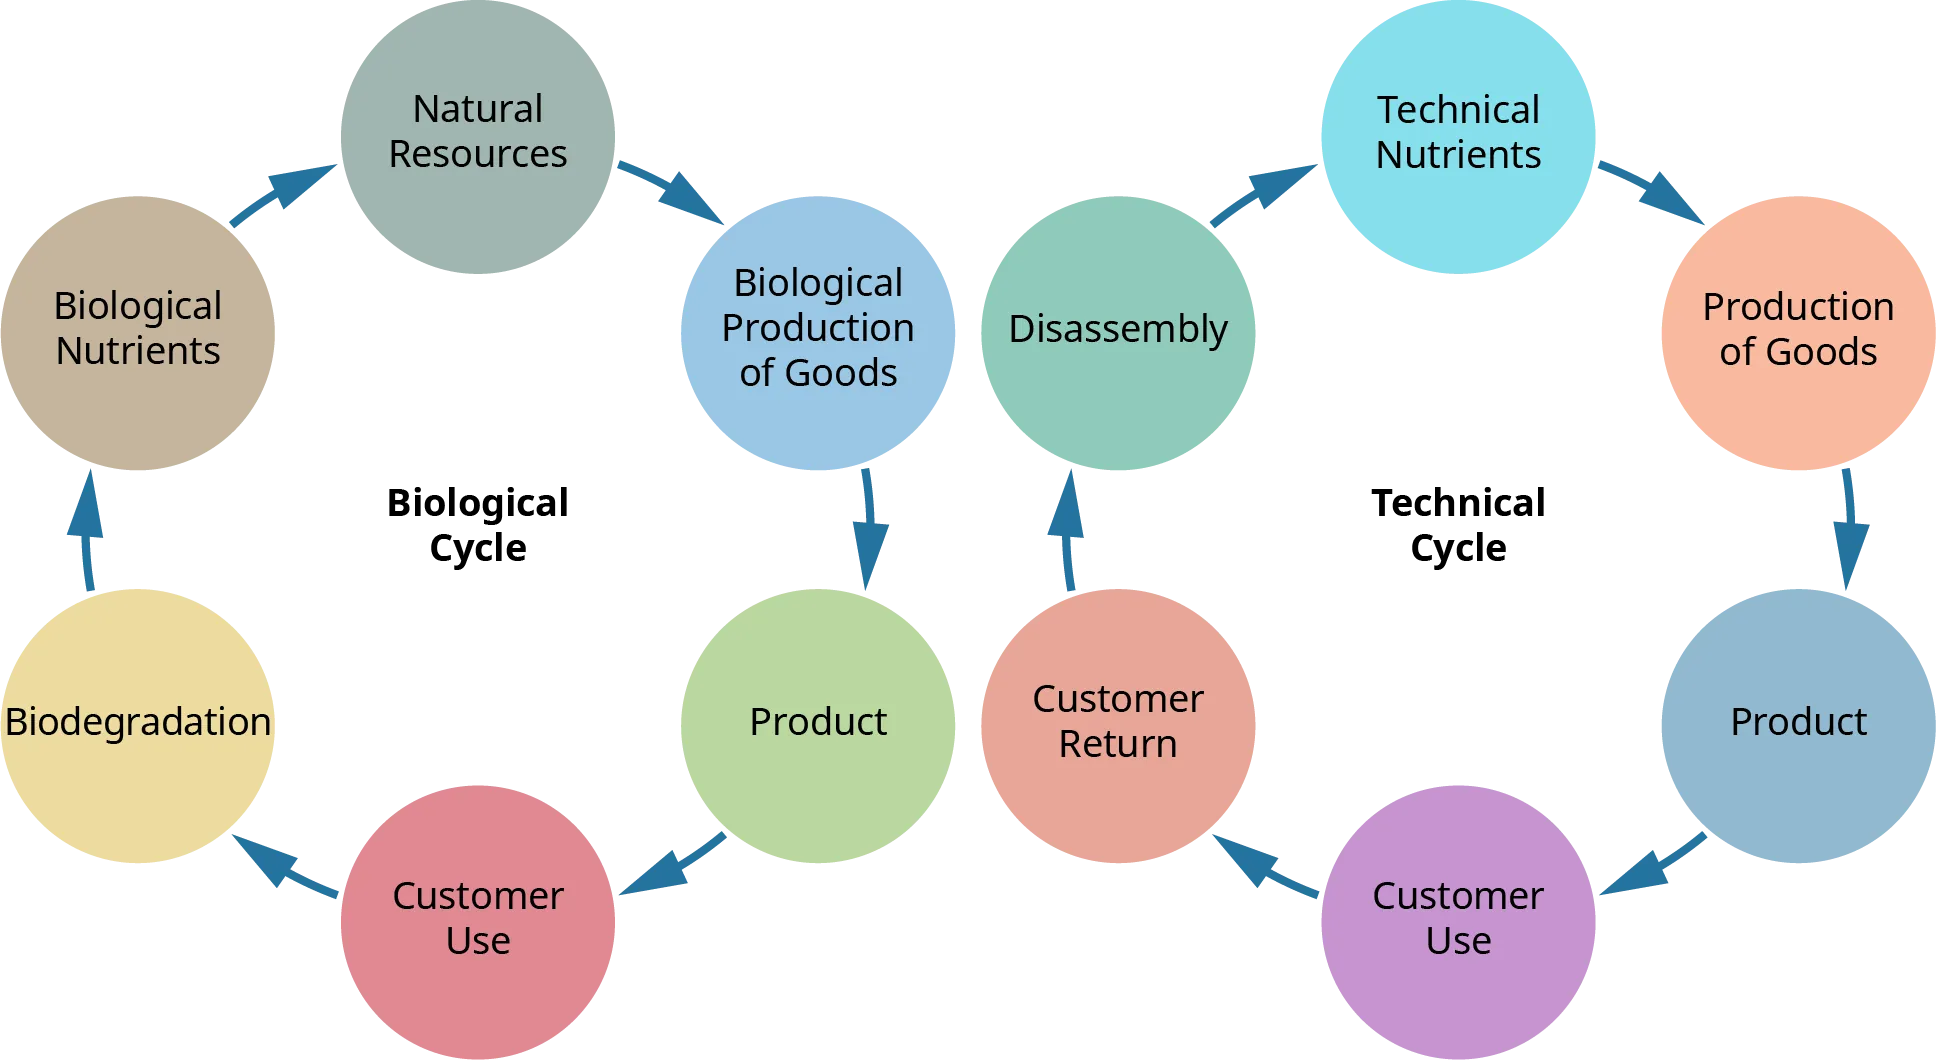 The cradle-to-cradle approach is shown in two circles that depict the recycling approach for biological products and technology products, with each process step shown in a  smaller circle pointing to the next circle. The biological recycling process starts with natural resources, then moves on to the biological production of goods, the product, customer use, biodegradation, and biological nutrients that are then turned back to natural resources. The technical cycle begins with technical nutrients (technical bits and pieces) that move on to the production of goods, the product, customer use, customer return, and disassembly which then leads back to technical nutrients.